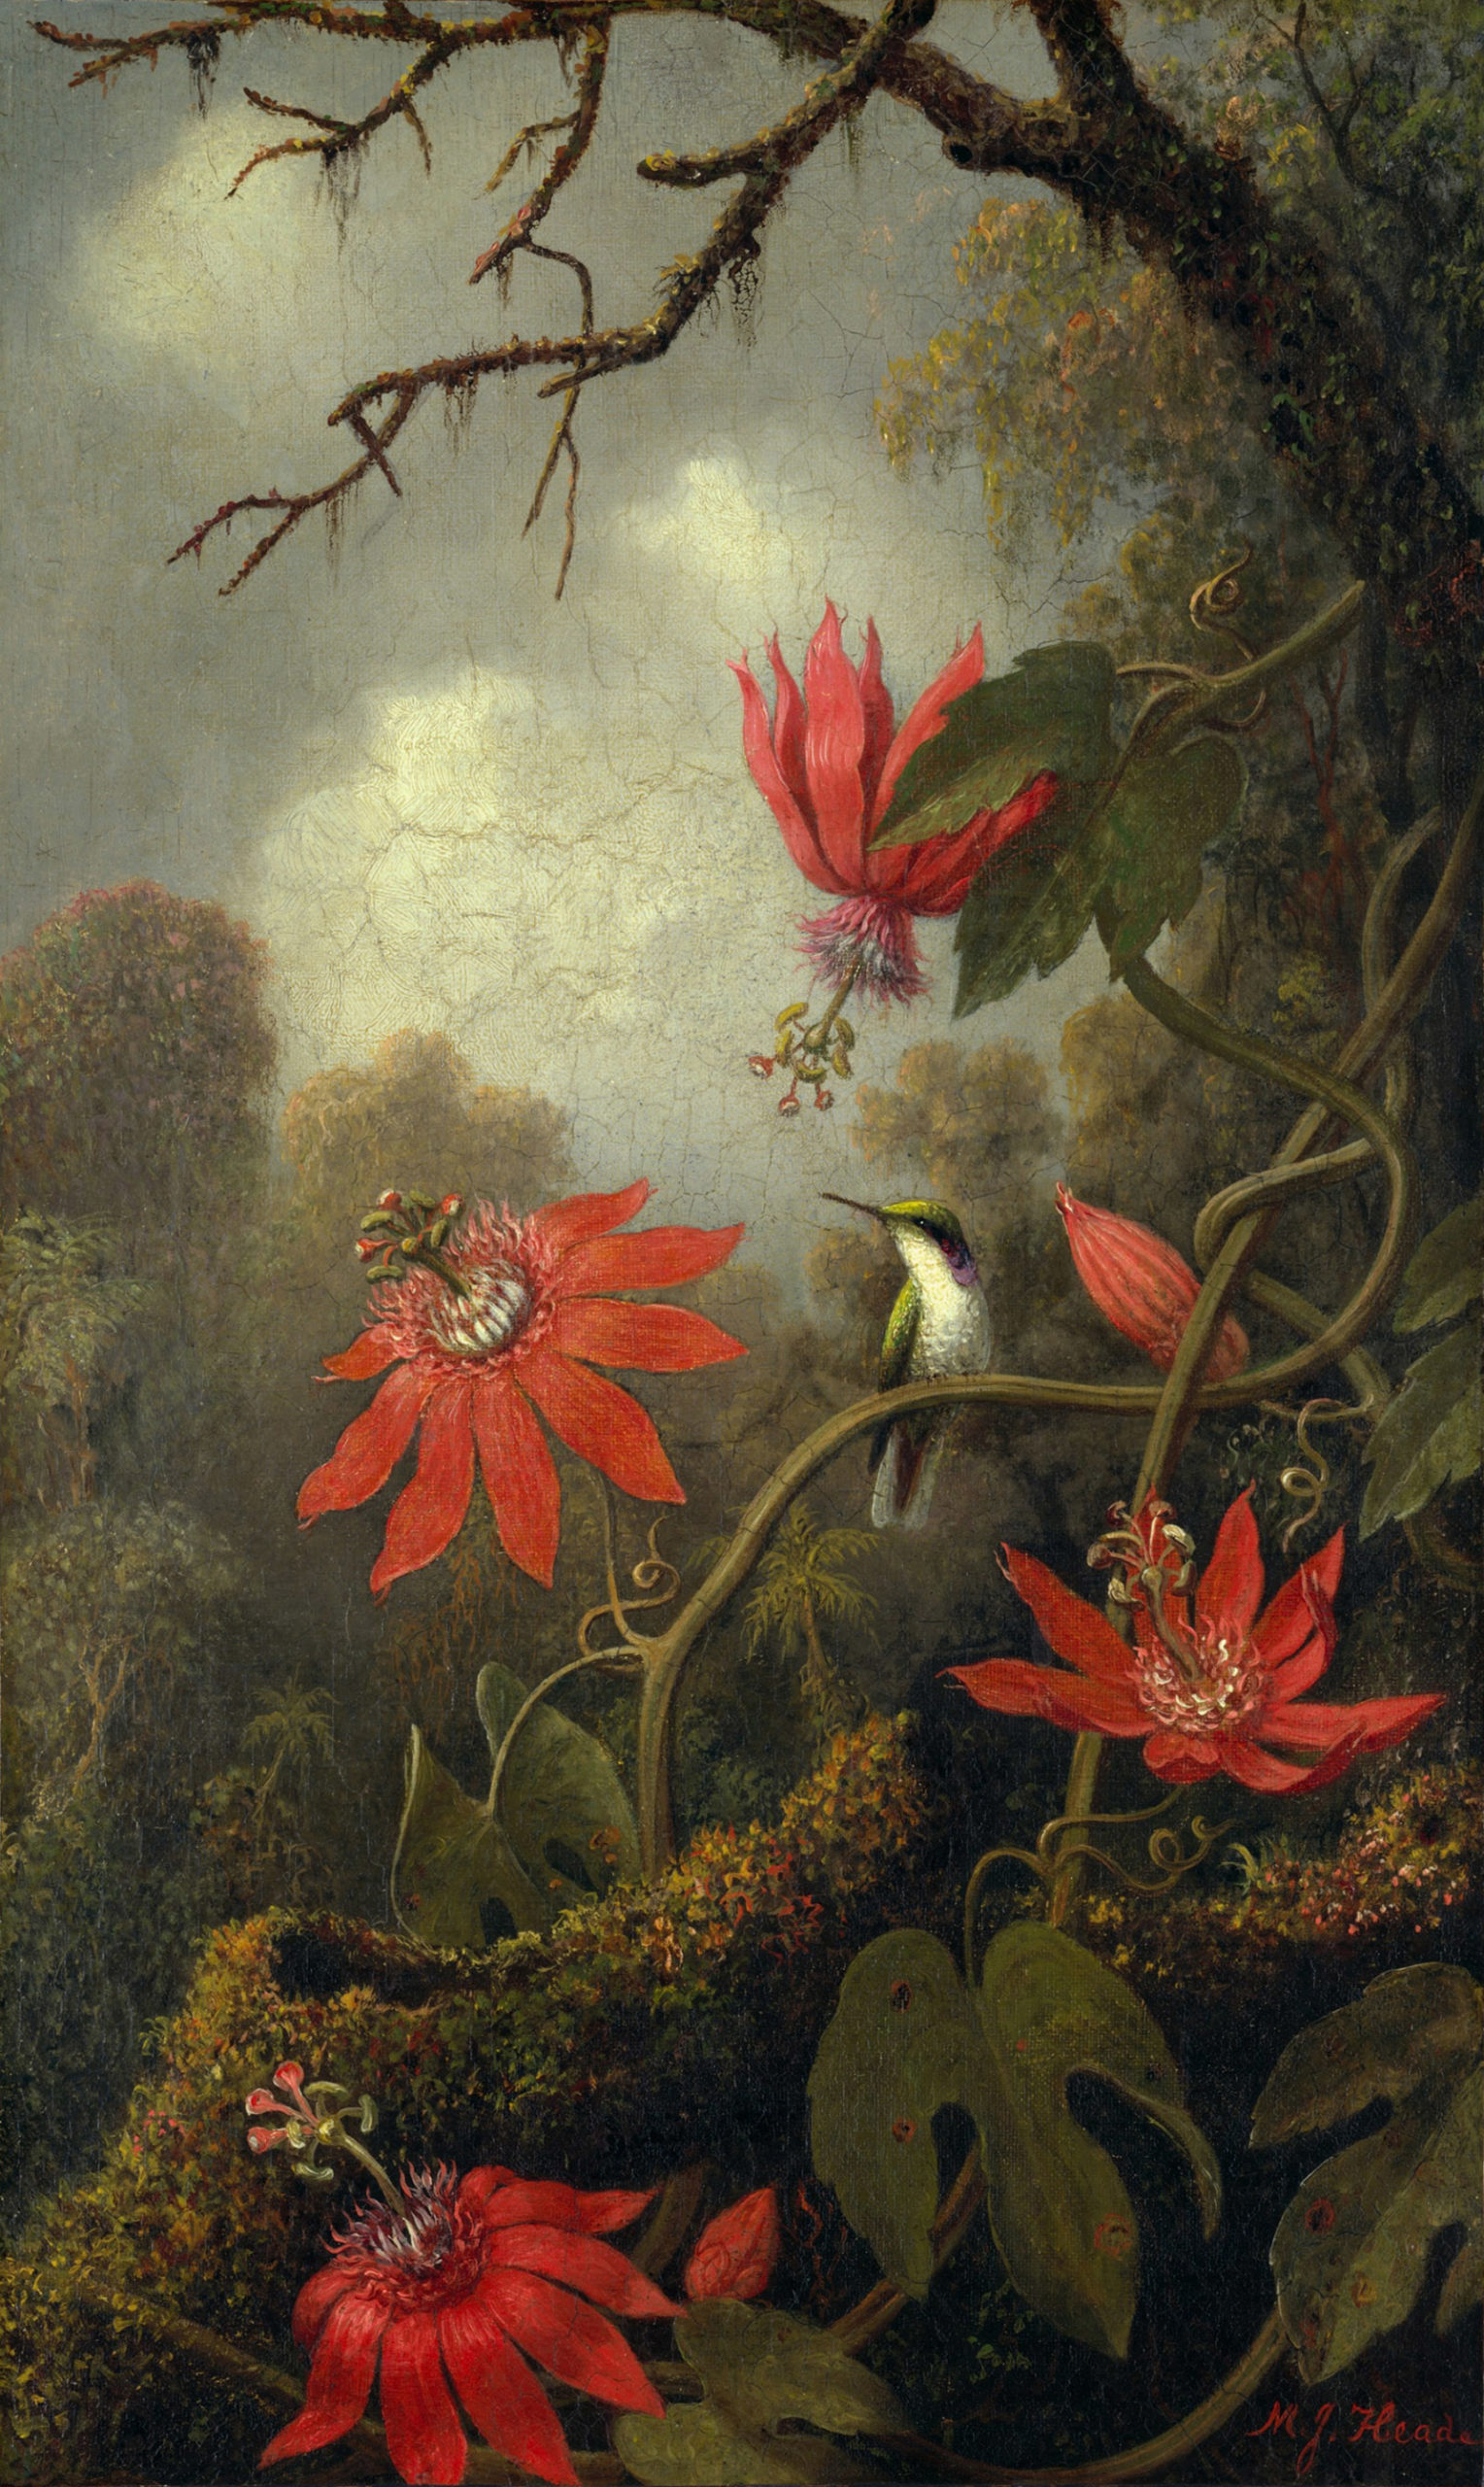 Hummingbird and Passionflowers; painting by Martin Johnson Heade